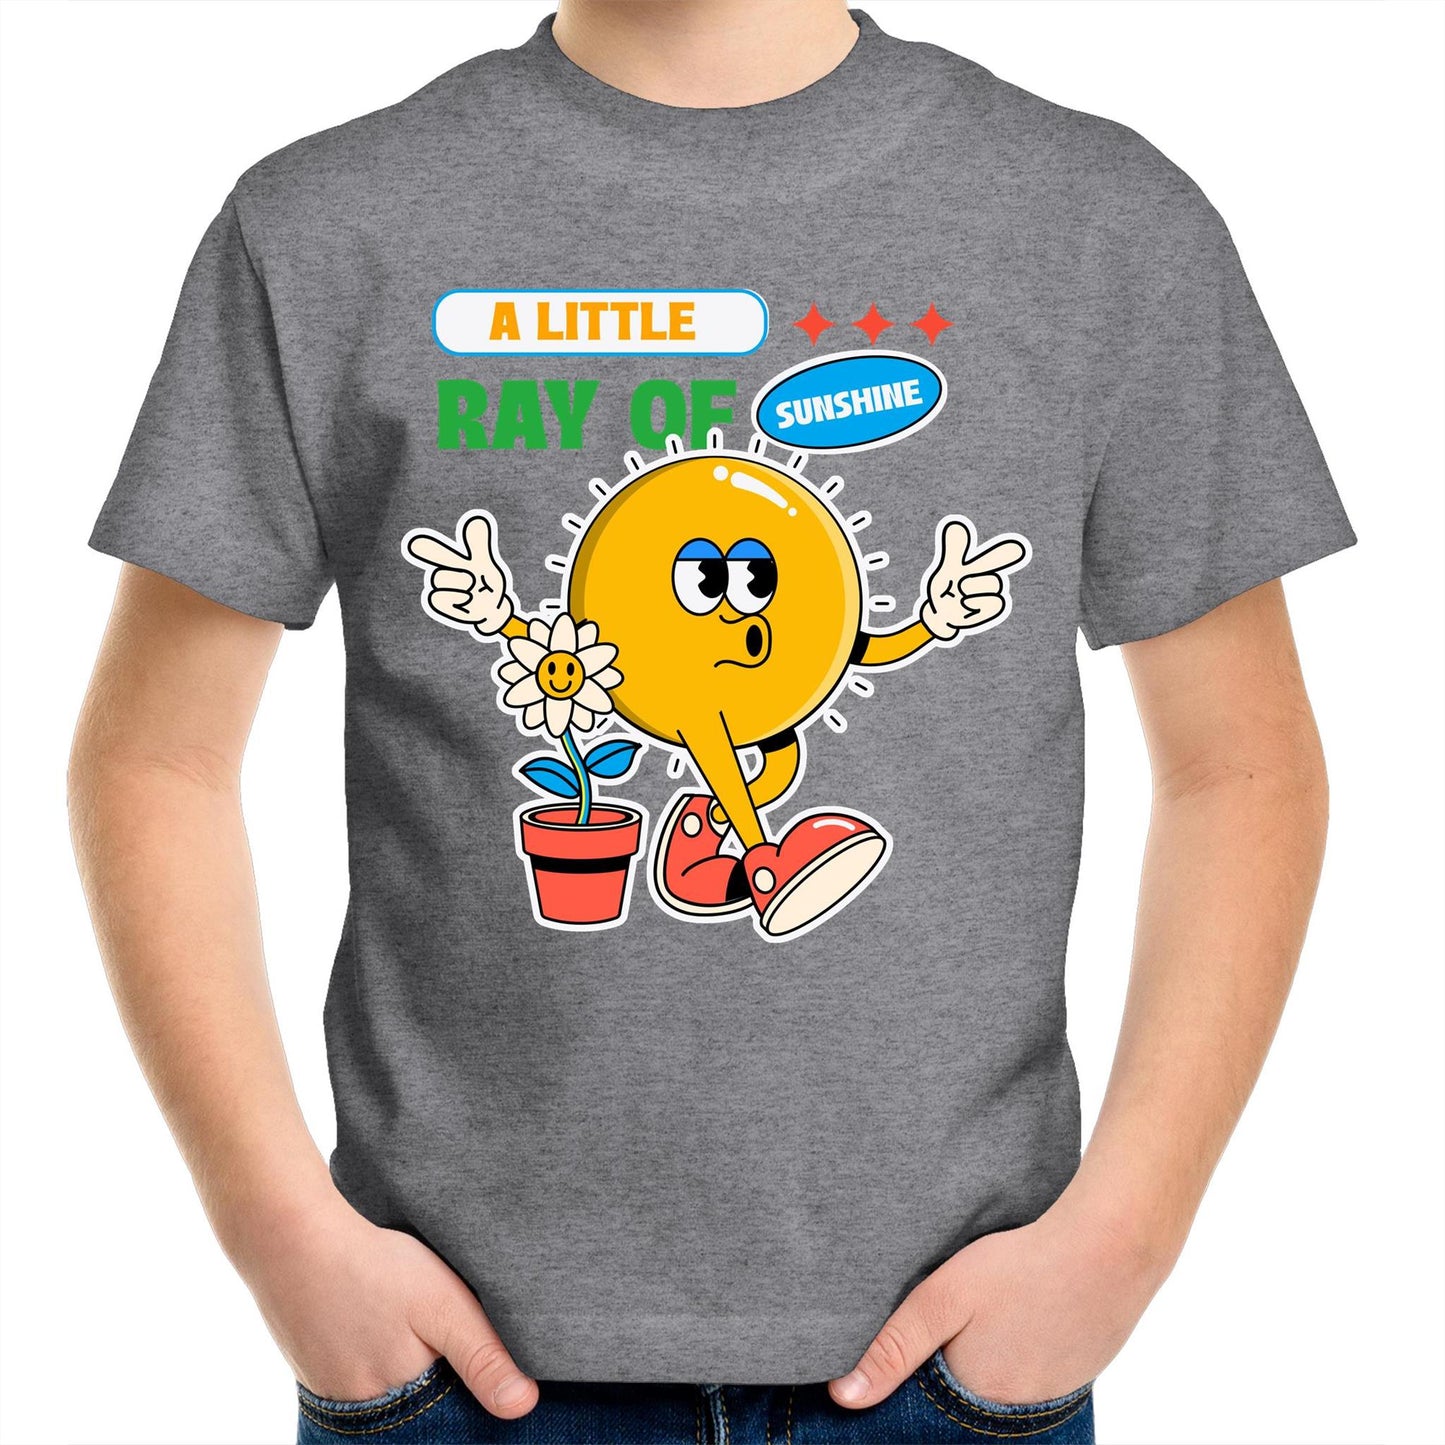 A Little Ray Of Sunshine - Kids Youth T-Shirt Grey Marle Kids Youth T-shirt Retro Summer